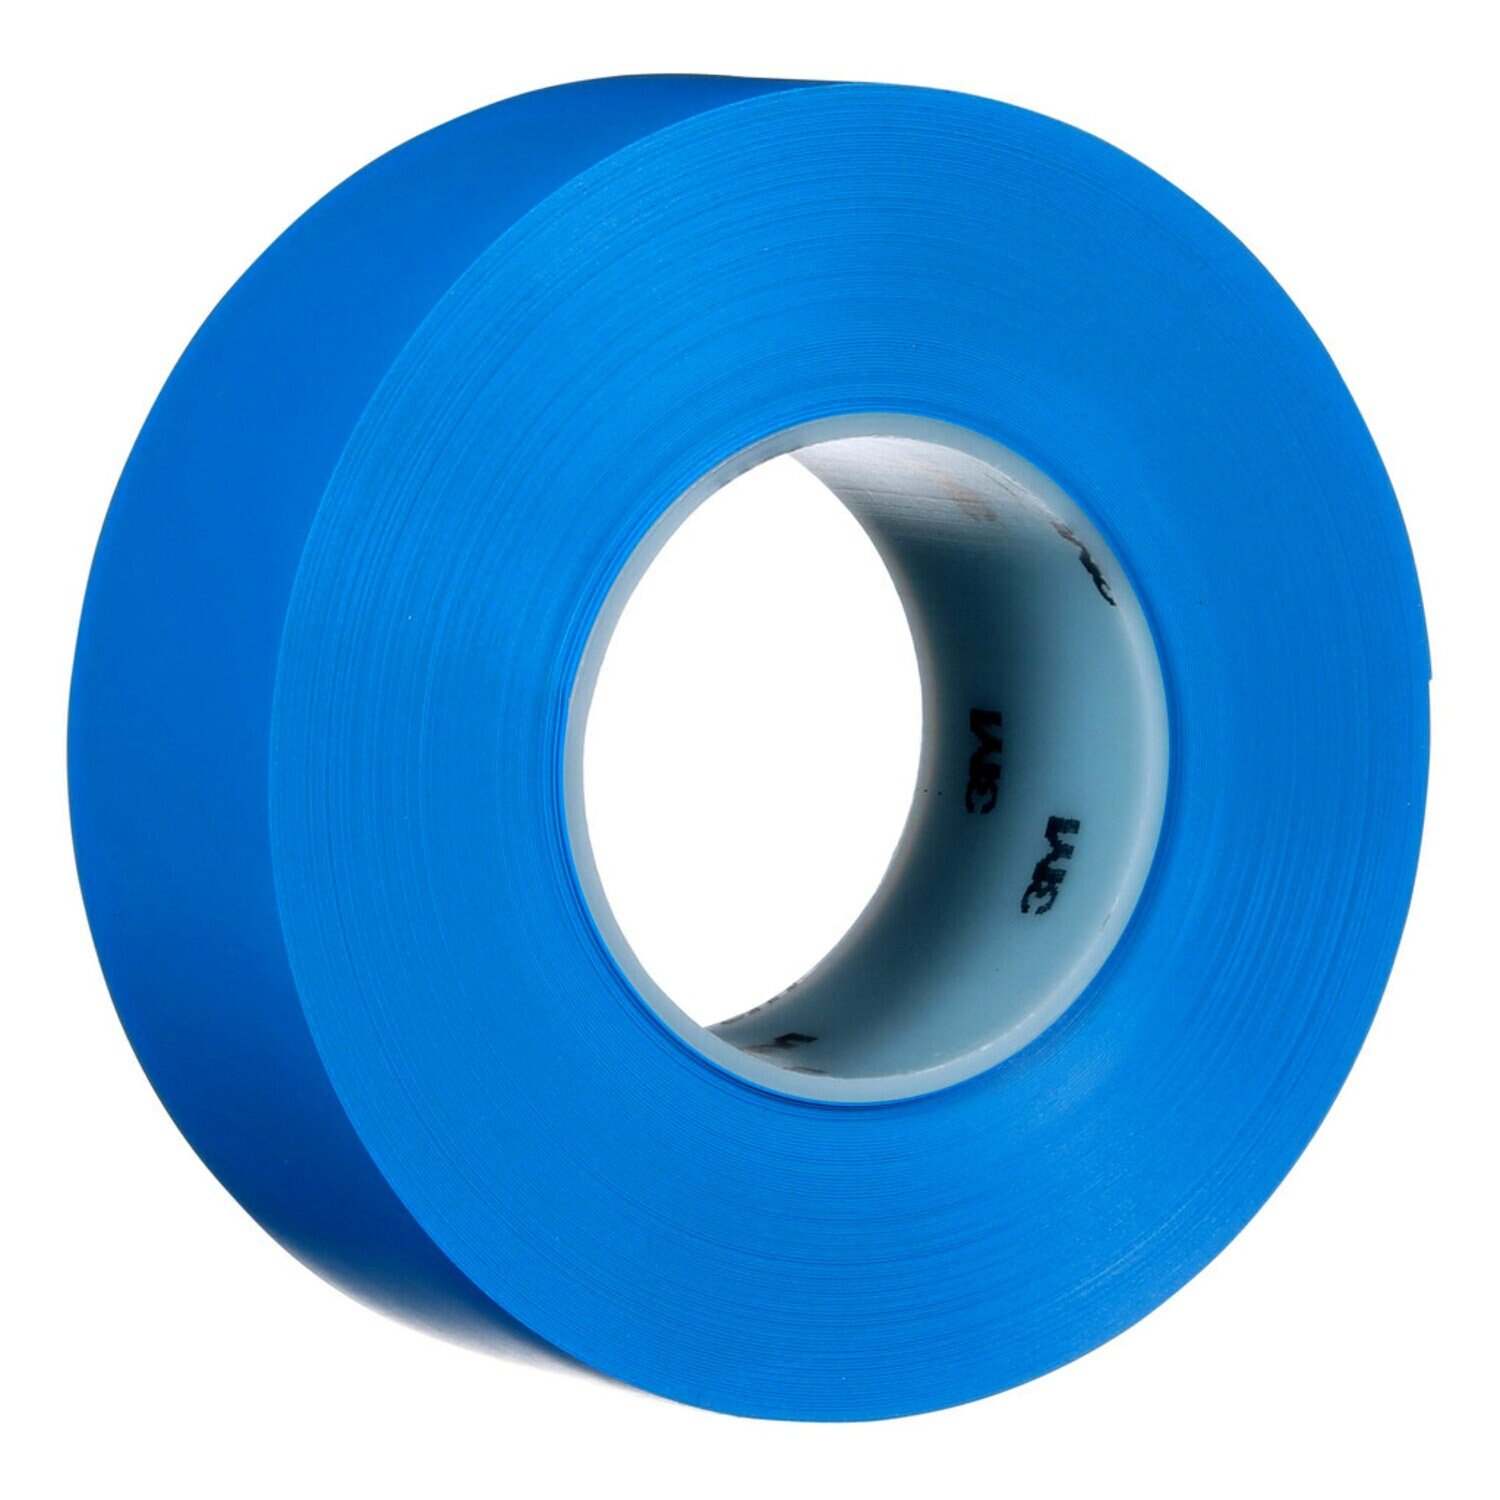 7100253141 - 3M Durable Floor Marking Tape 971, Blue, 2 in x 36 yd, 17 mil, 6 Rolls/Case, Individually Wrapped Conveniently Packaged